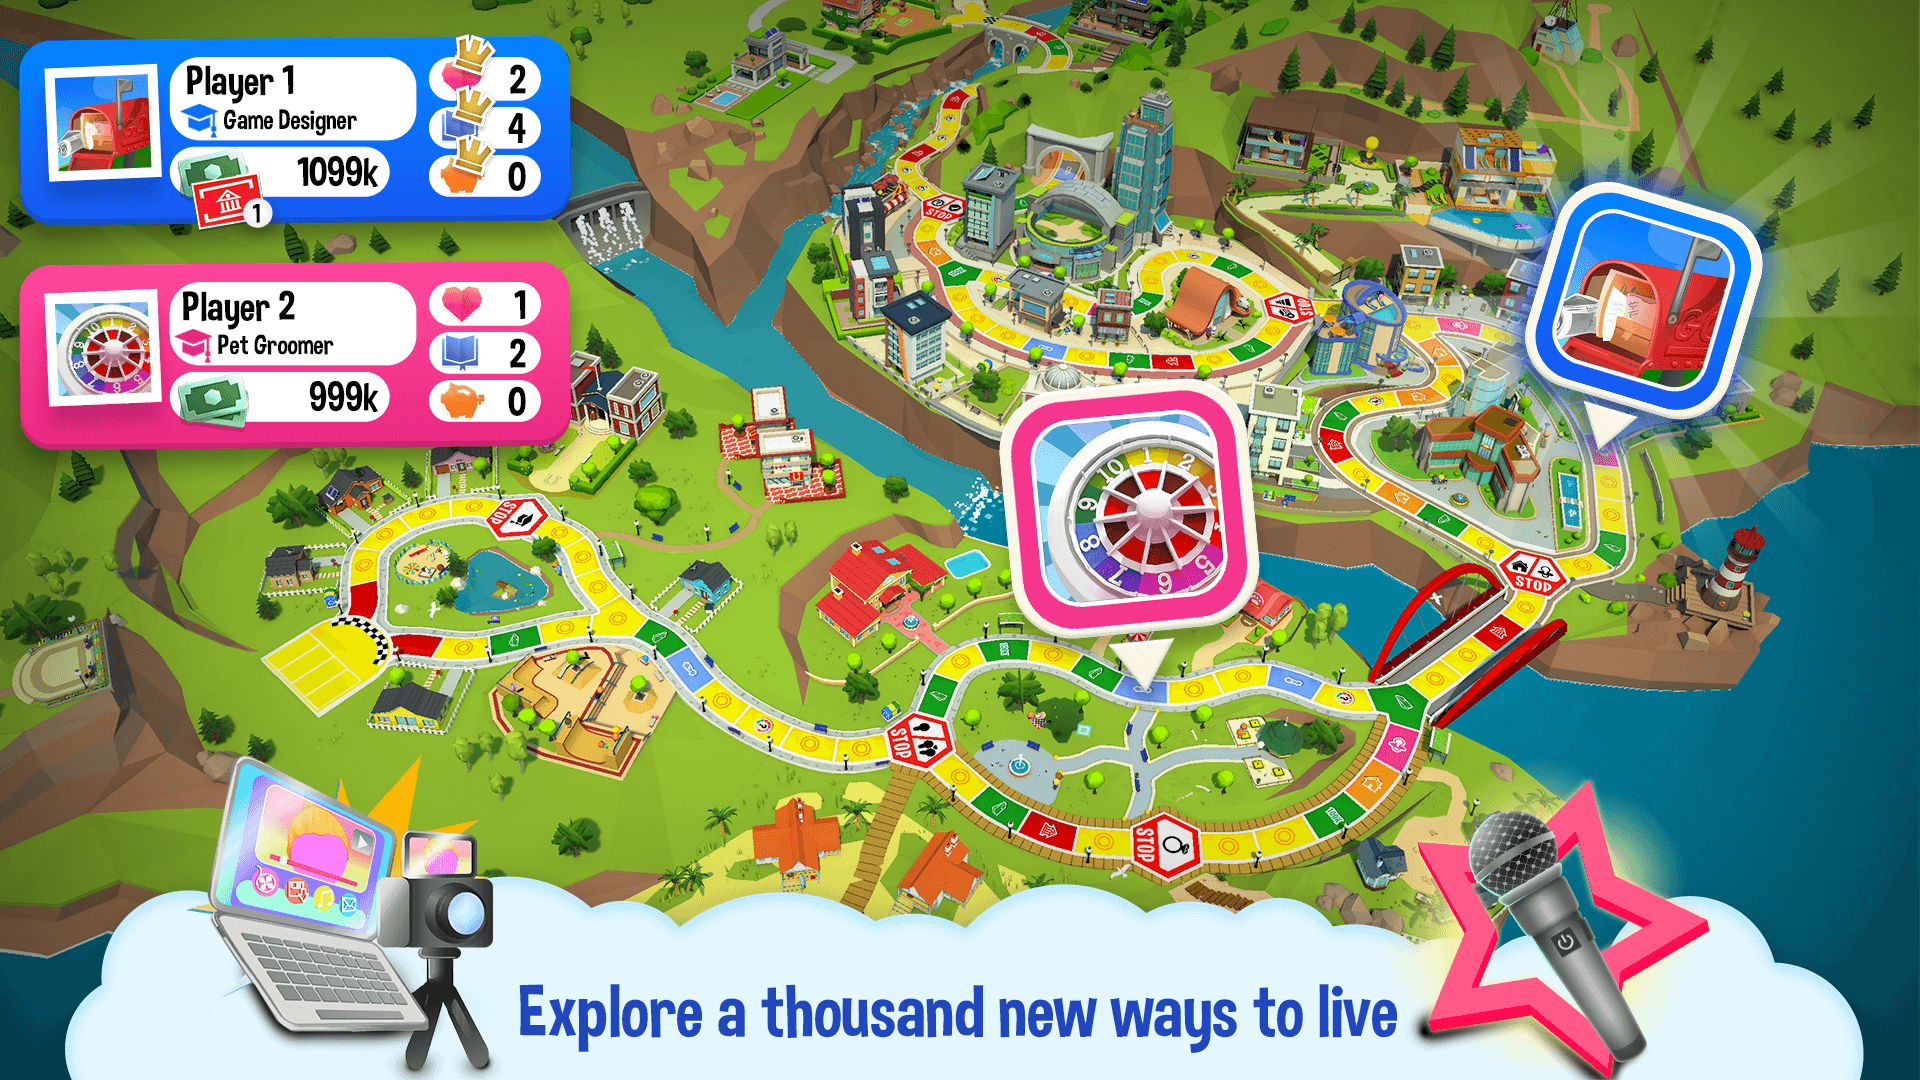 Download & Play THE GAME OF LIFE Vacations on PC & Mac